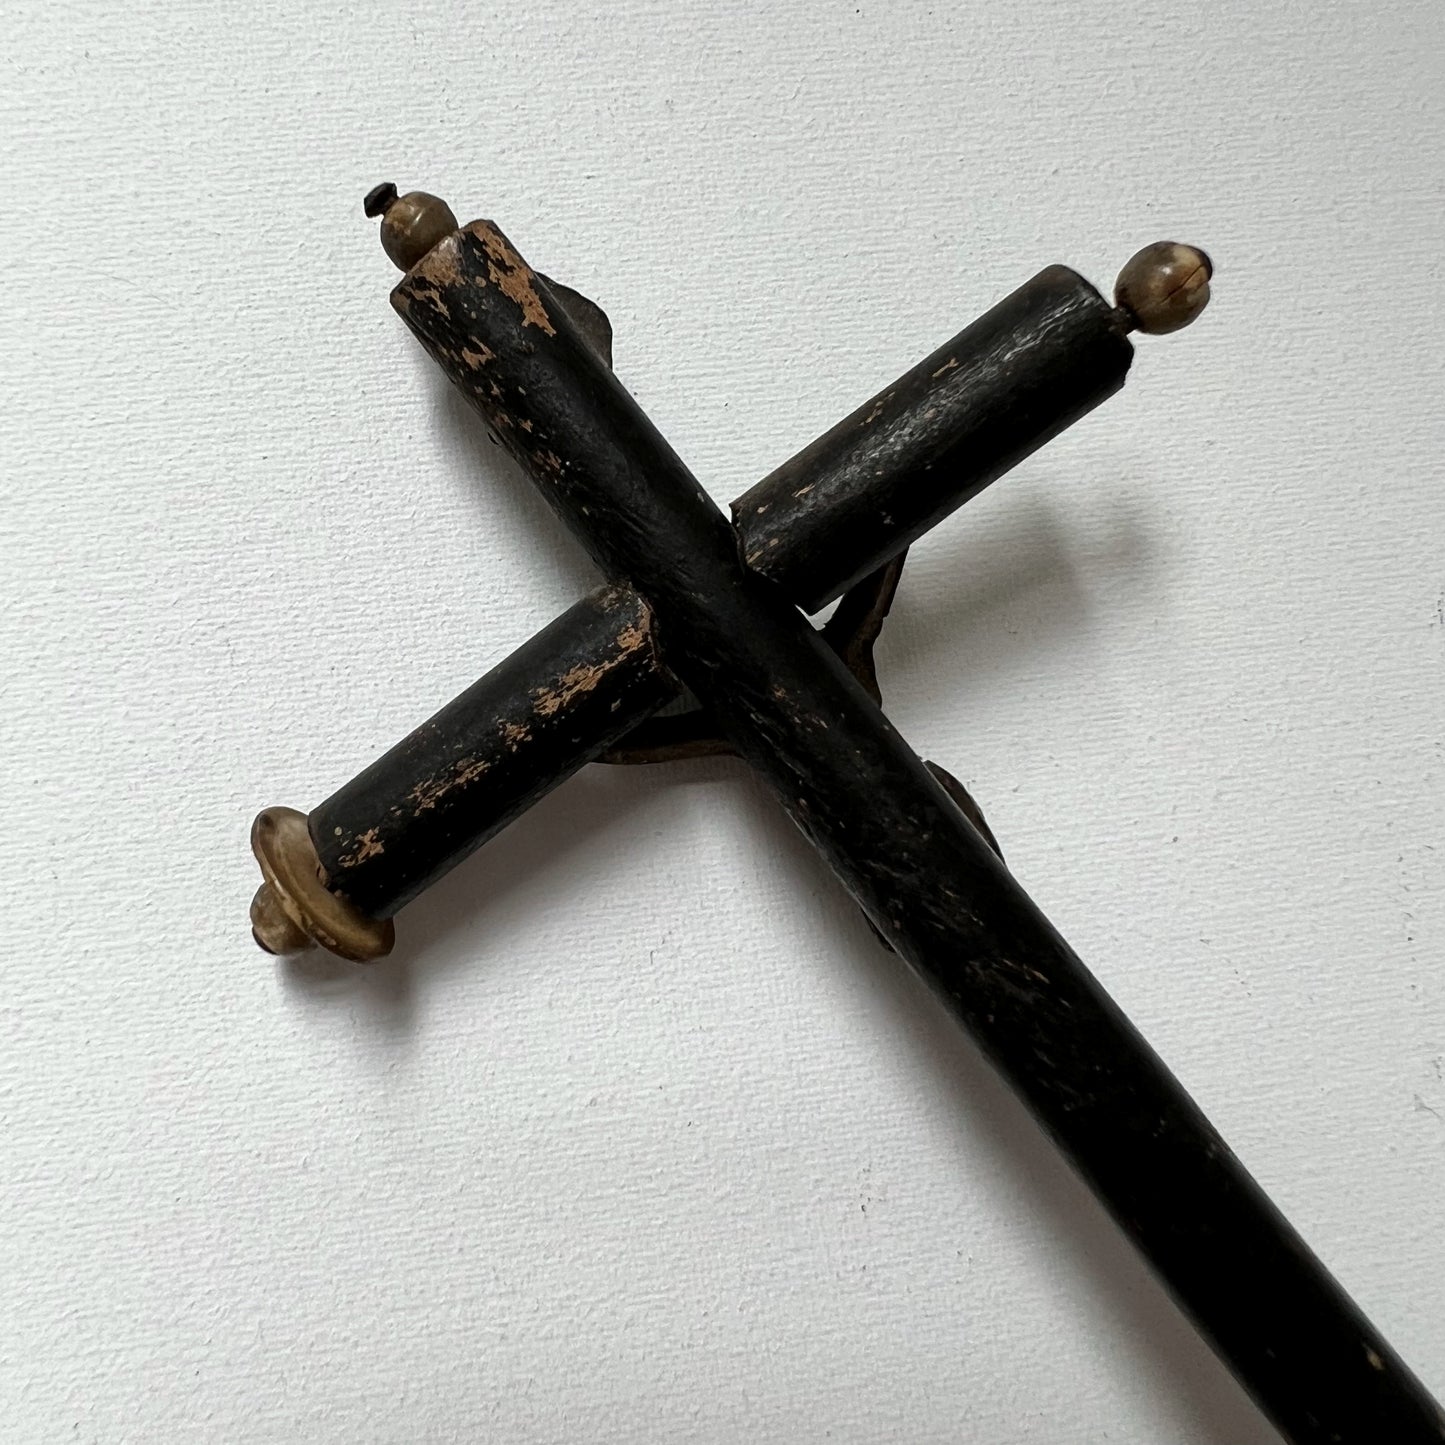 【Antique】France 1900s Wood and Metal Cross